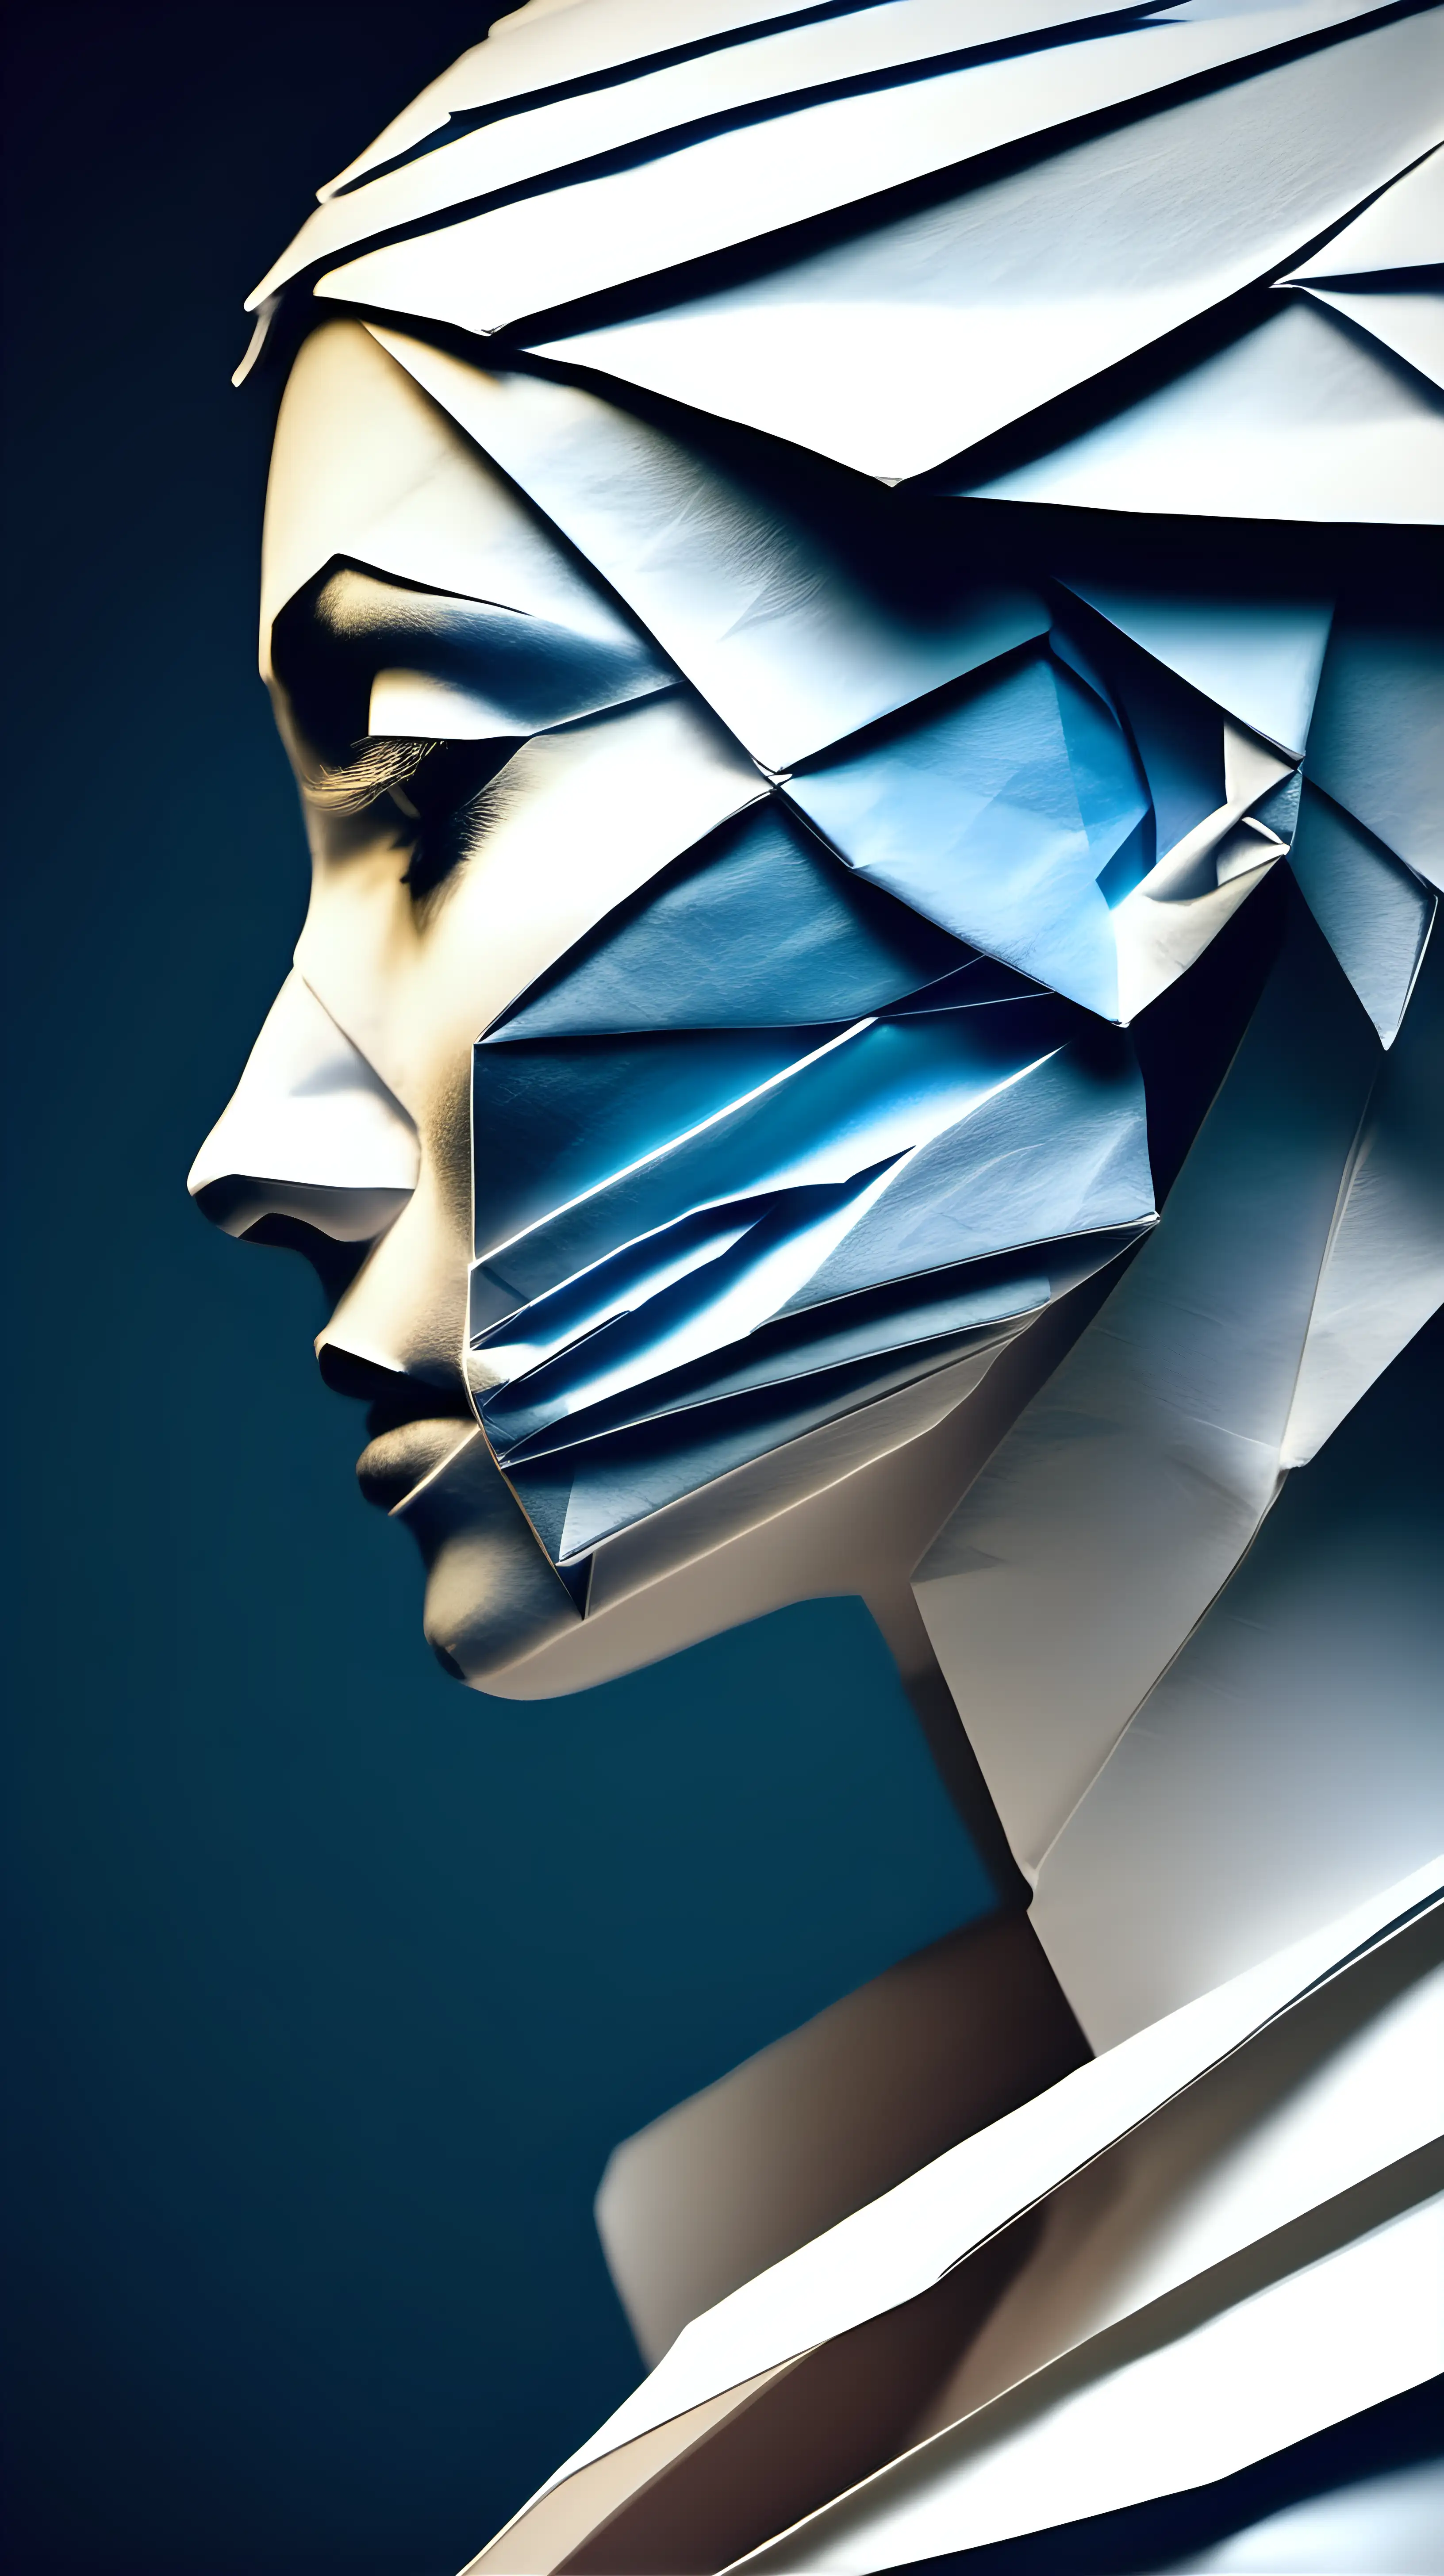 Elegant Womans Profile in Dramatic Origami Style with Blue Eyes